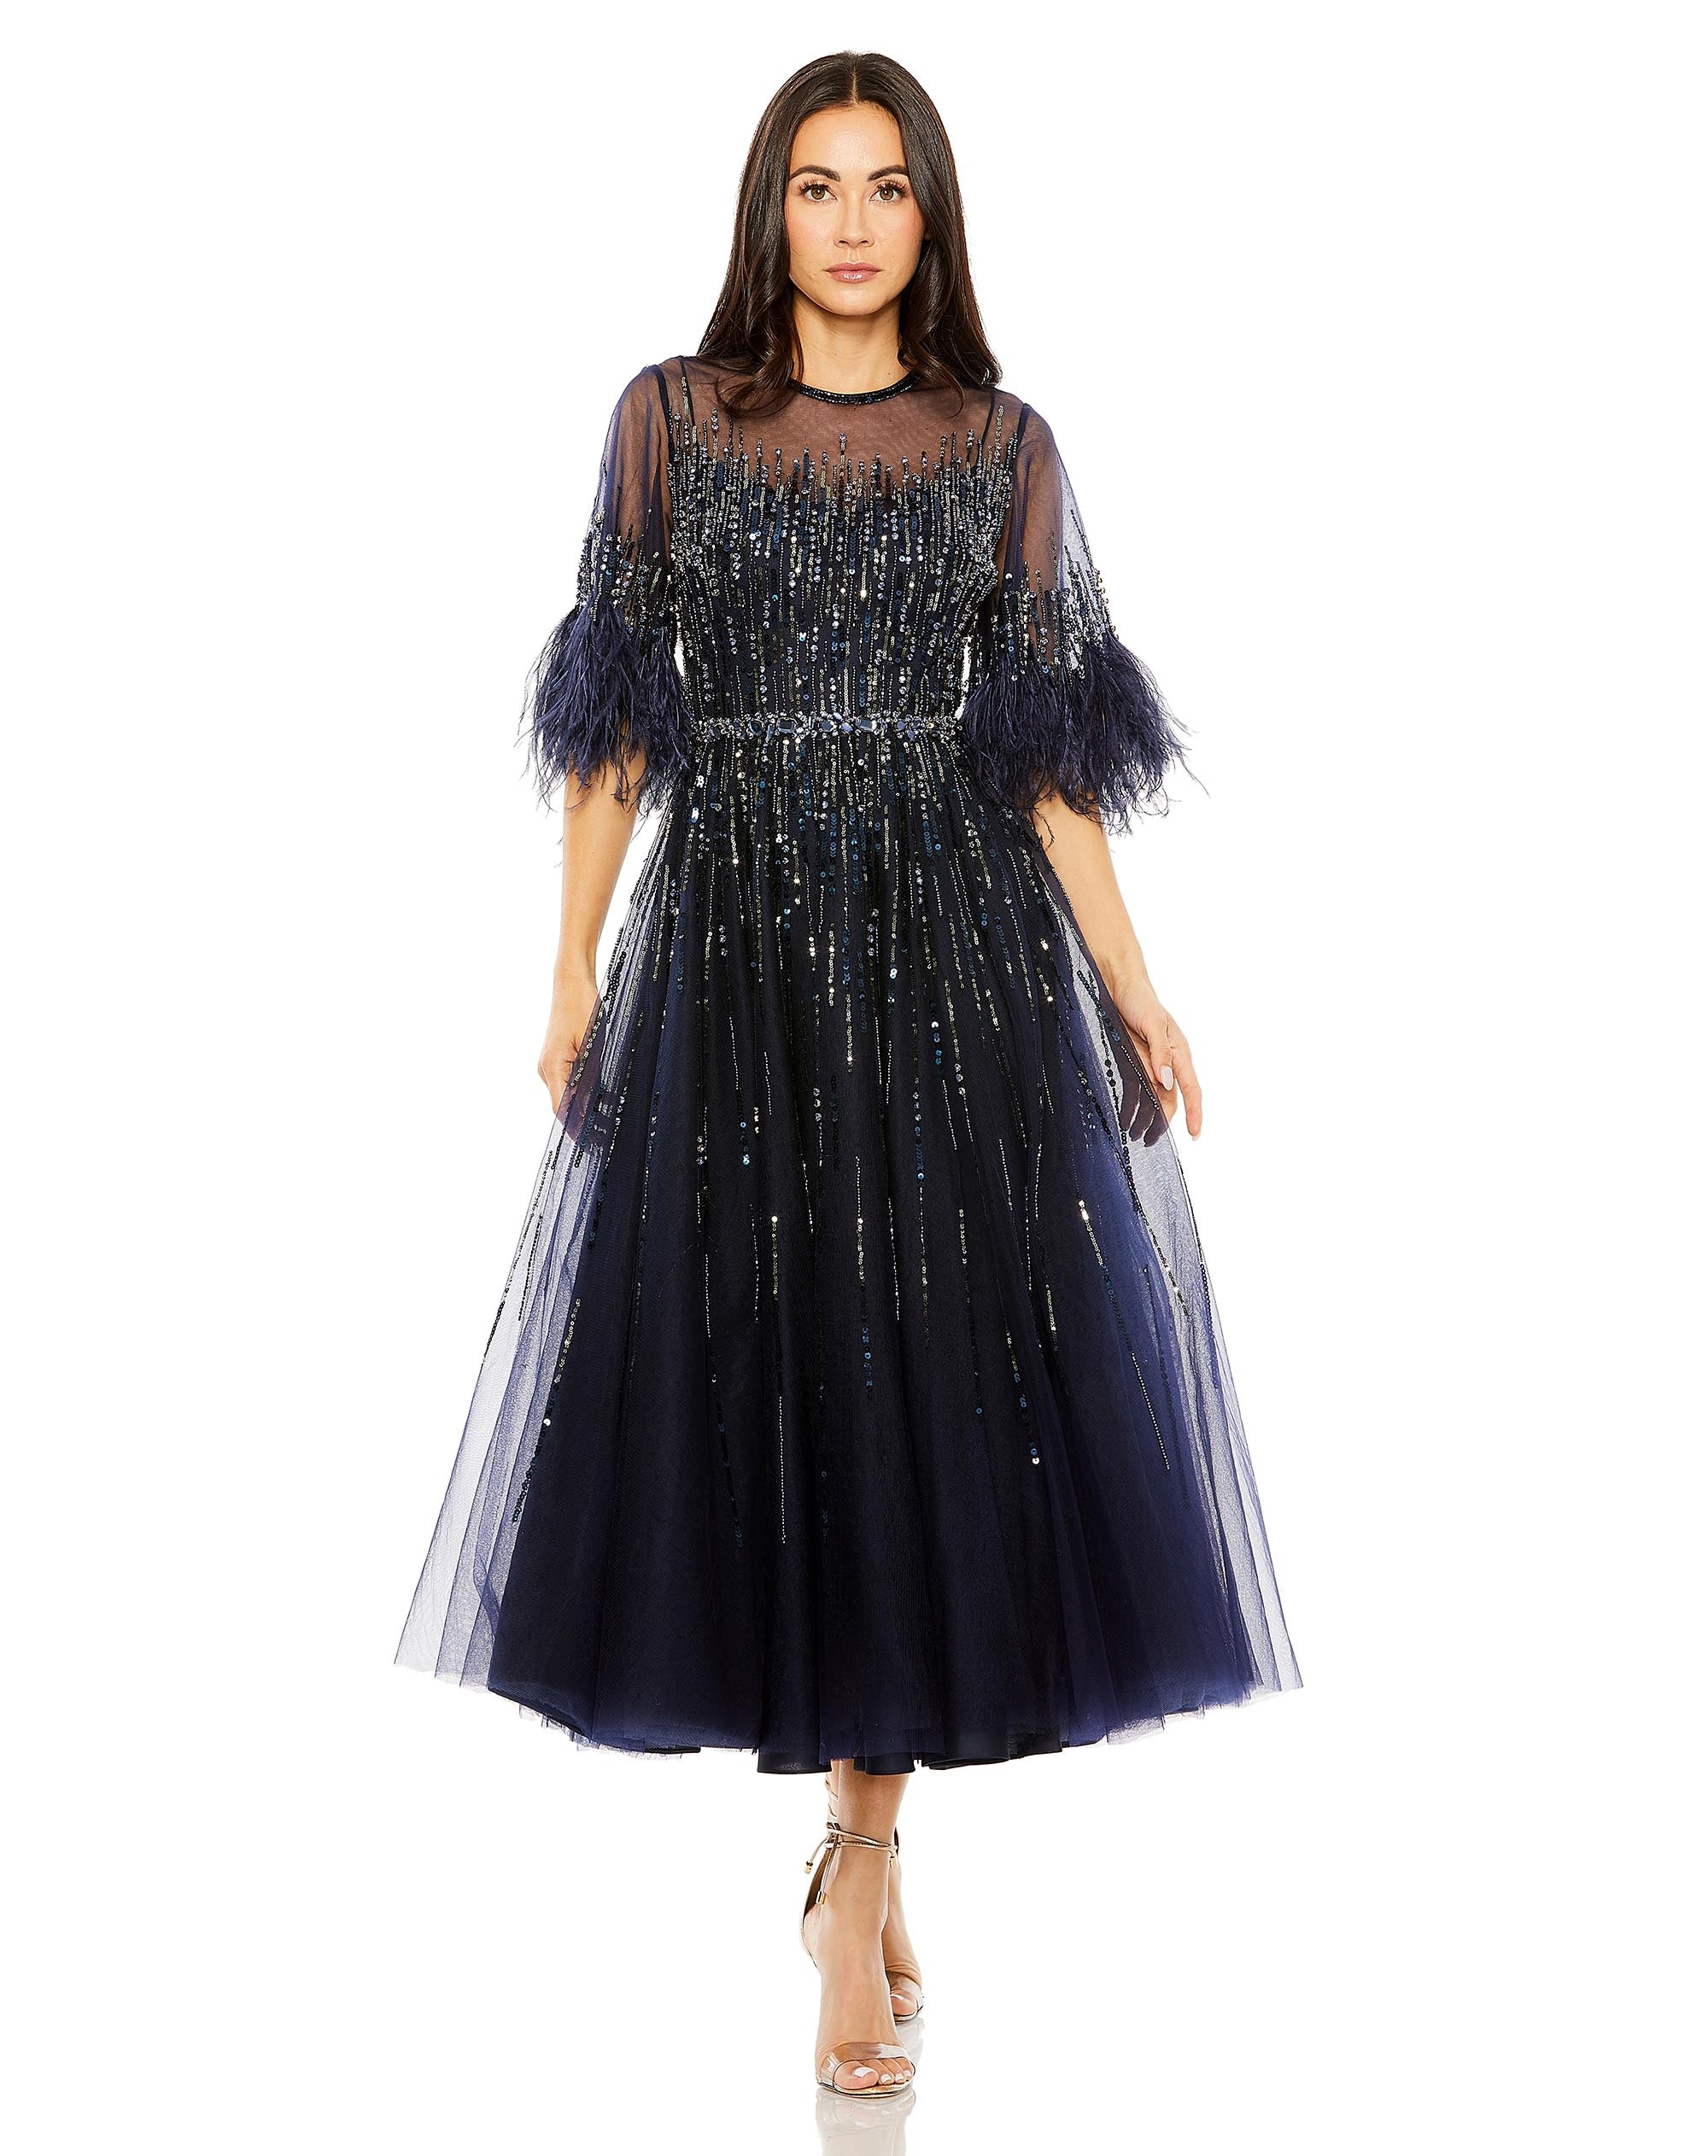 High Neck A-Line Tea-Length Dress with 3/4 Feather Detail Sleeves